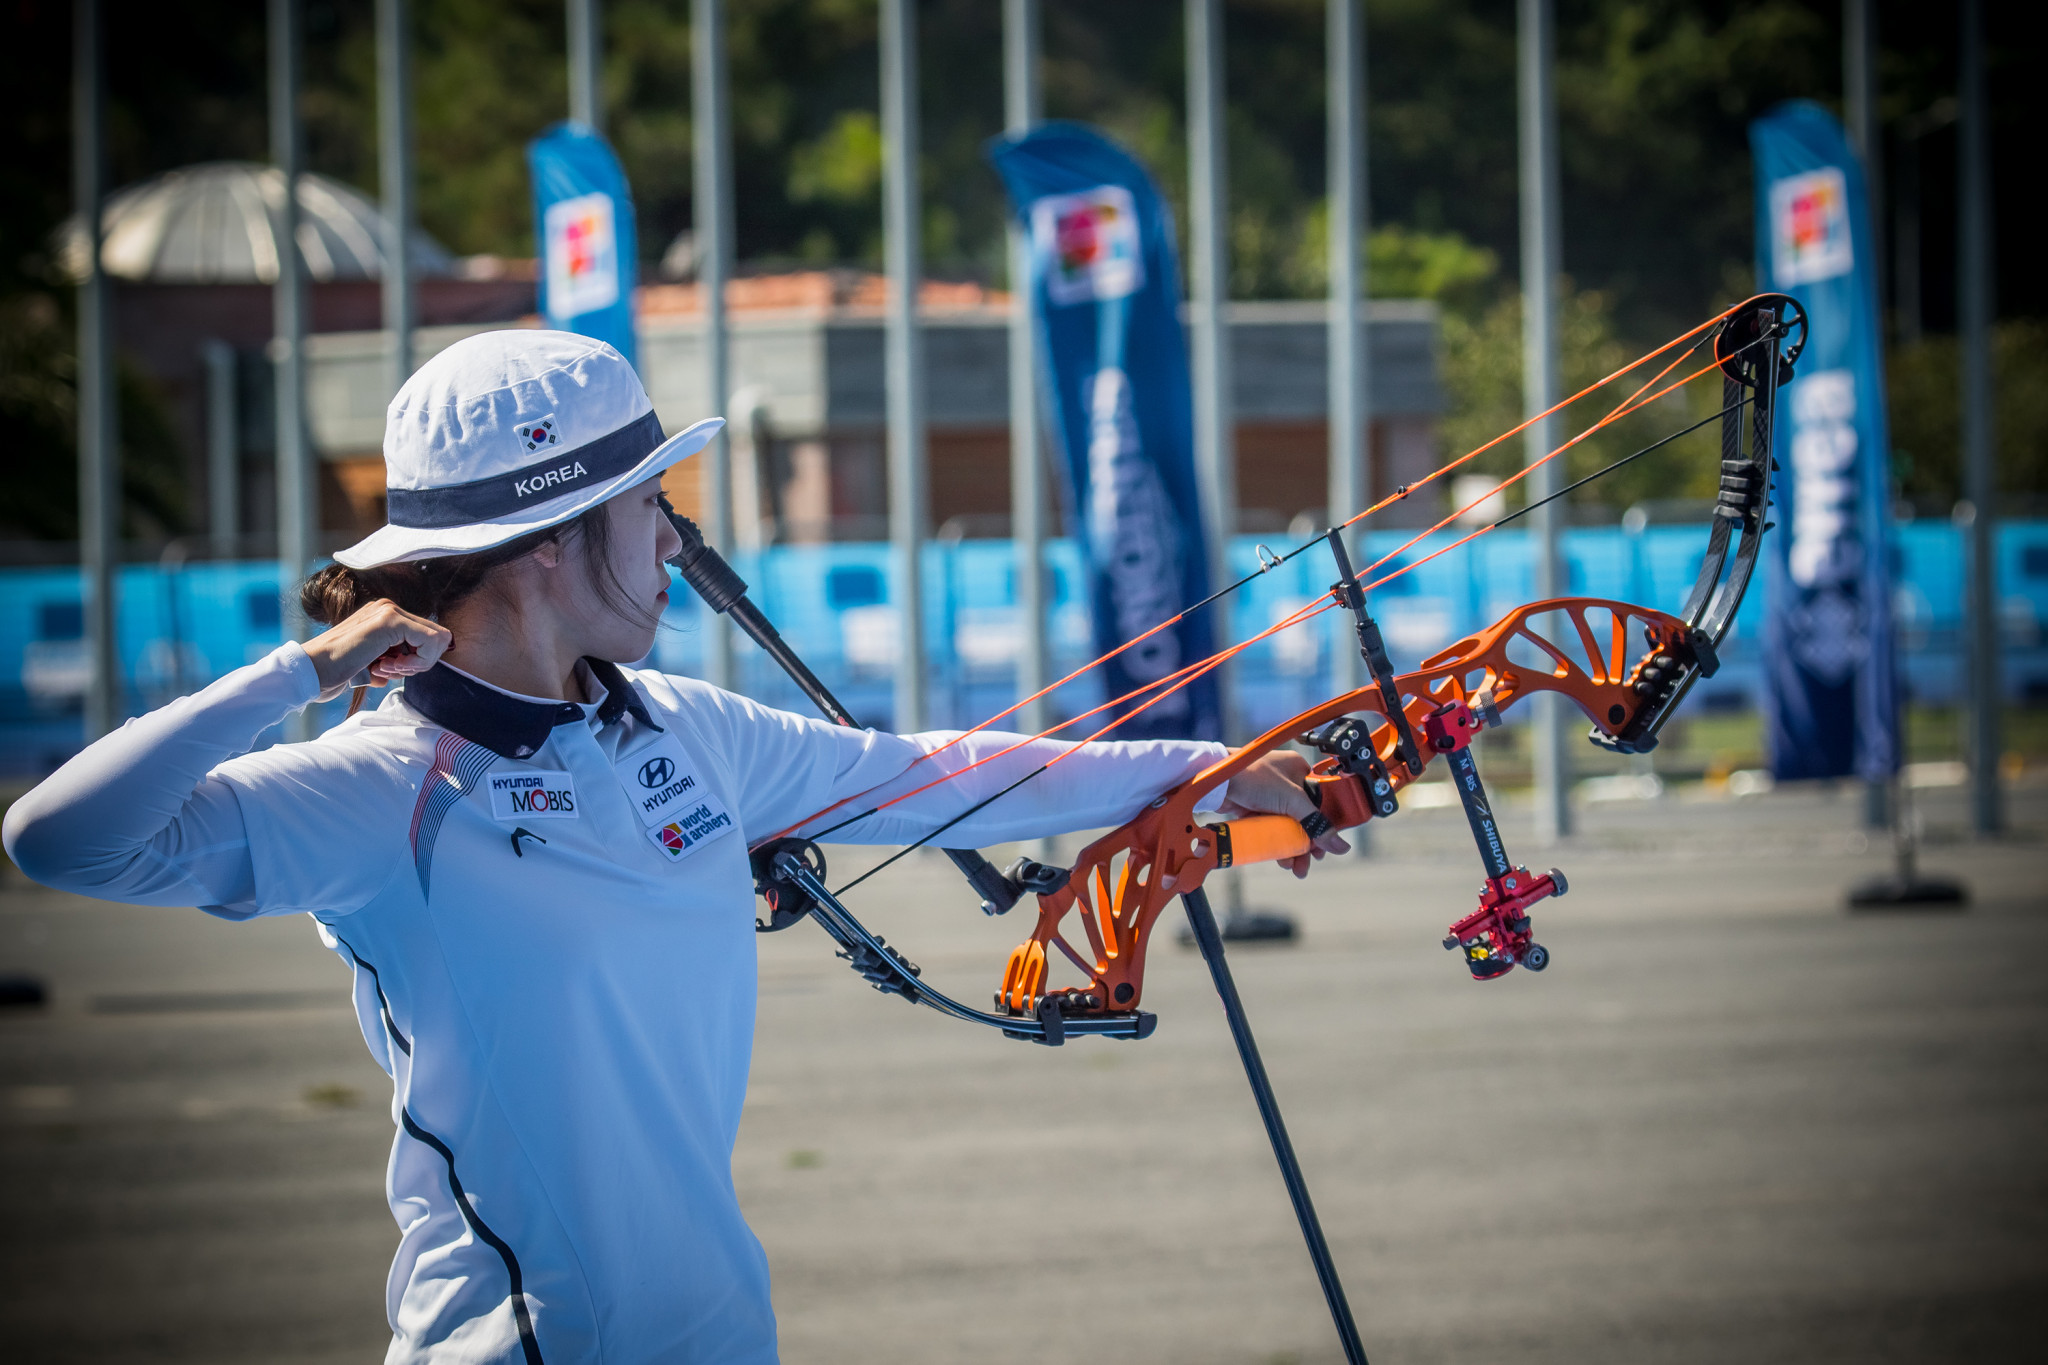 The Vanguard spotting scope will be used at international events such as the Archery World Cup ©Getty Images